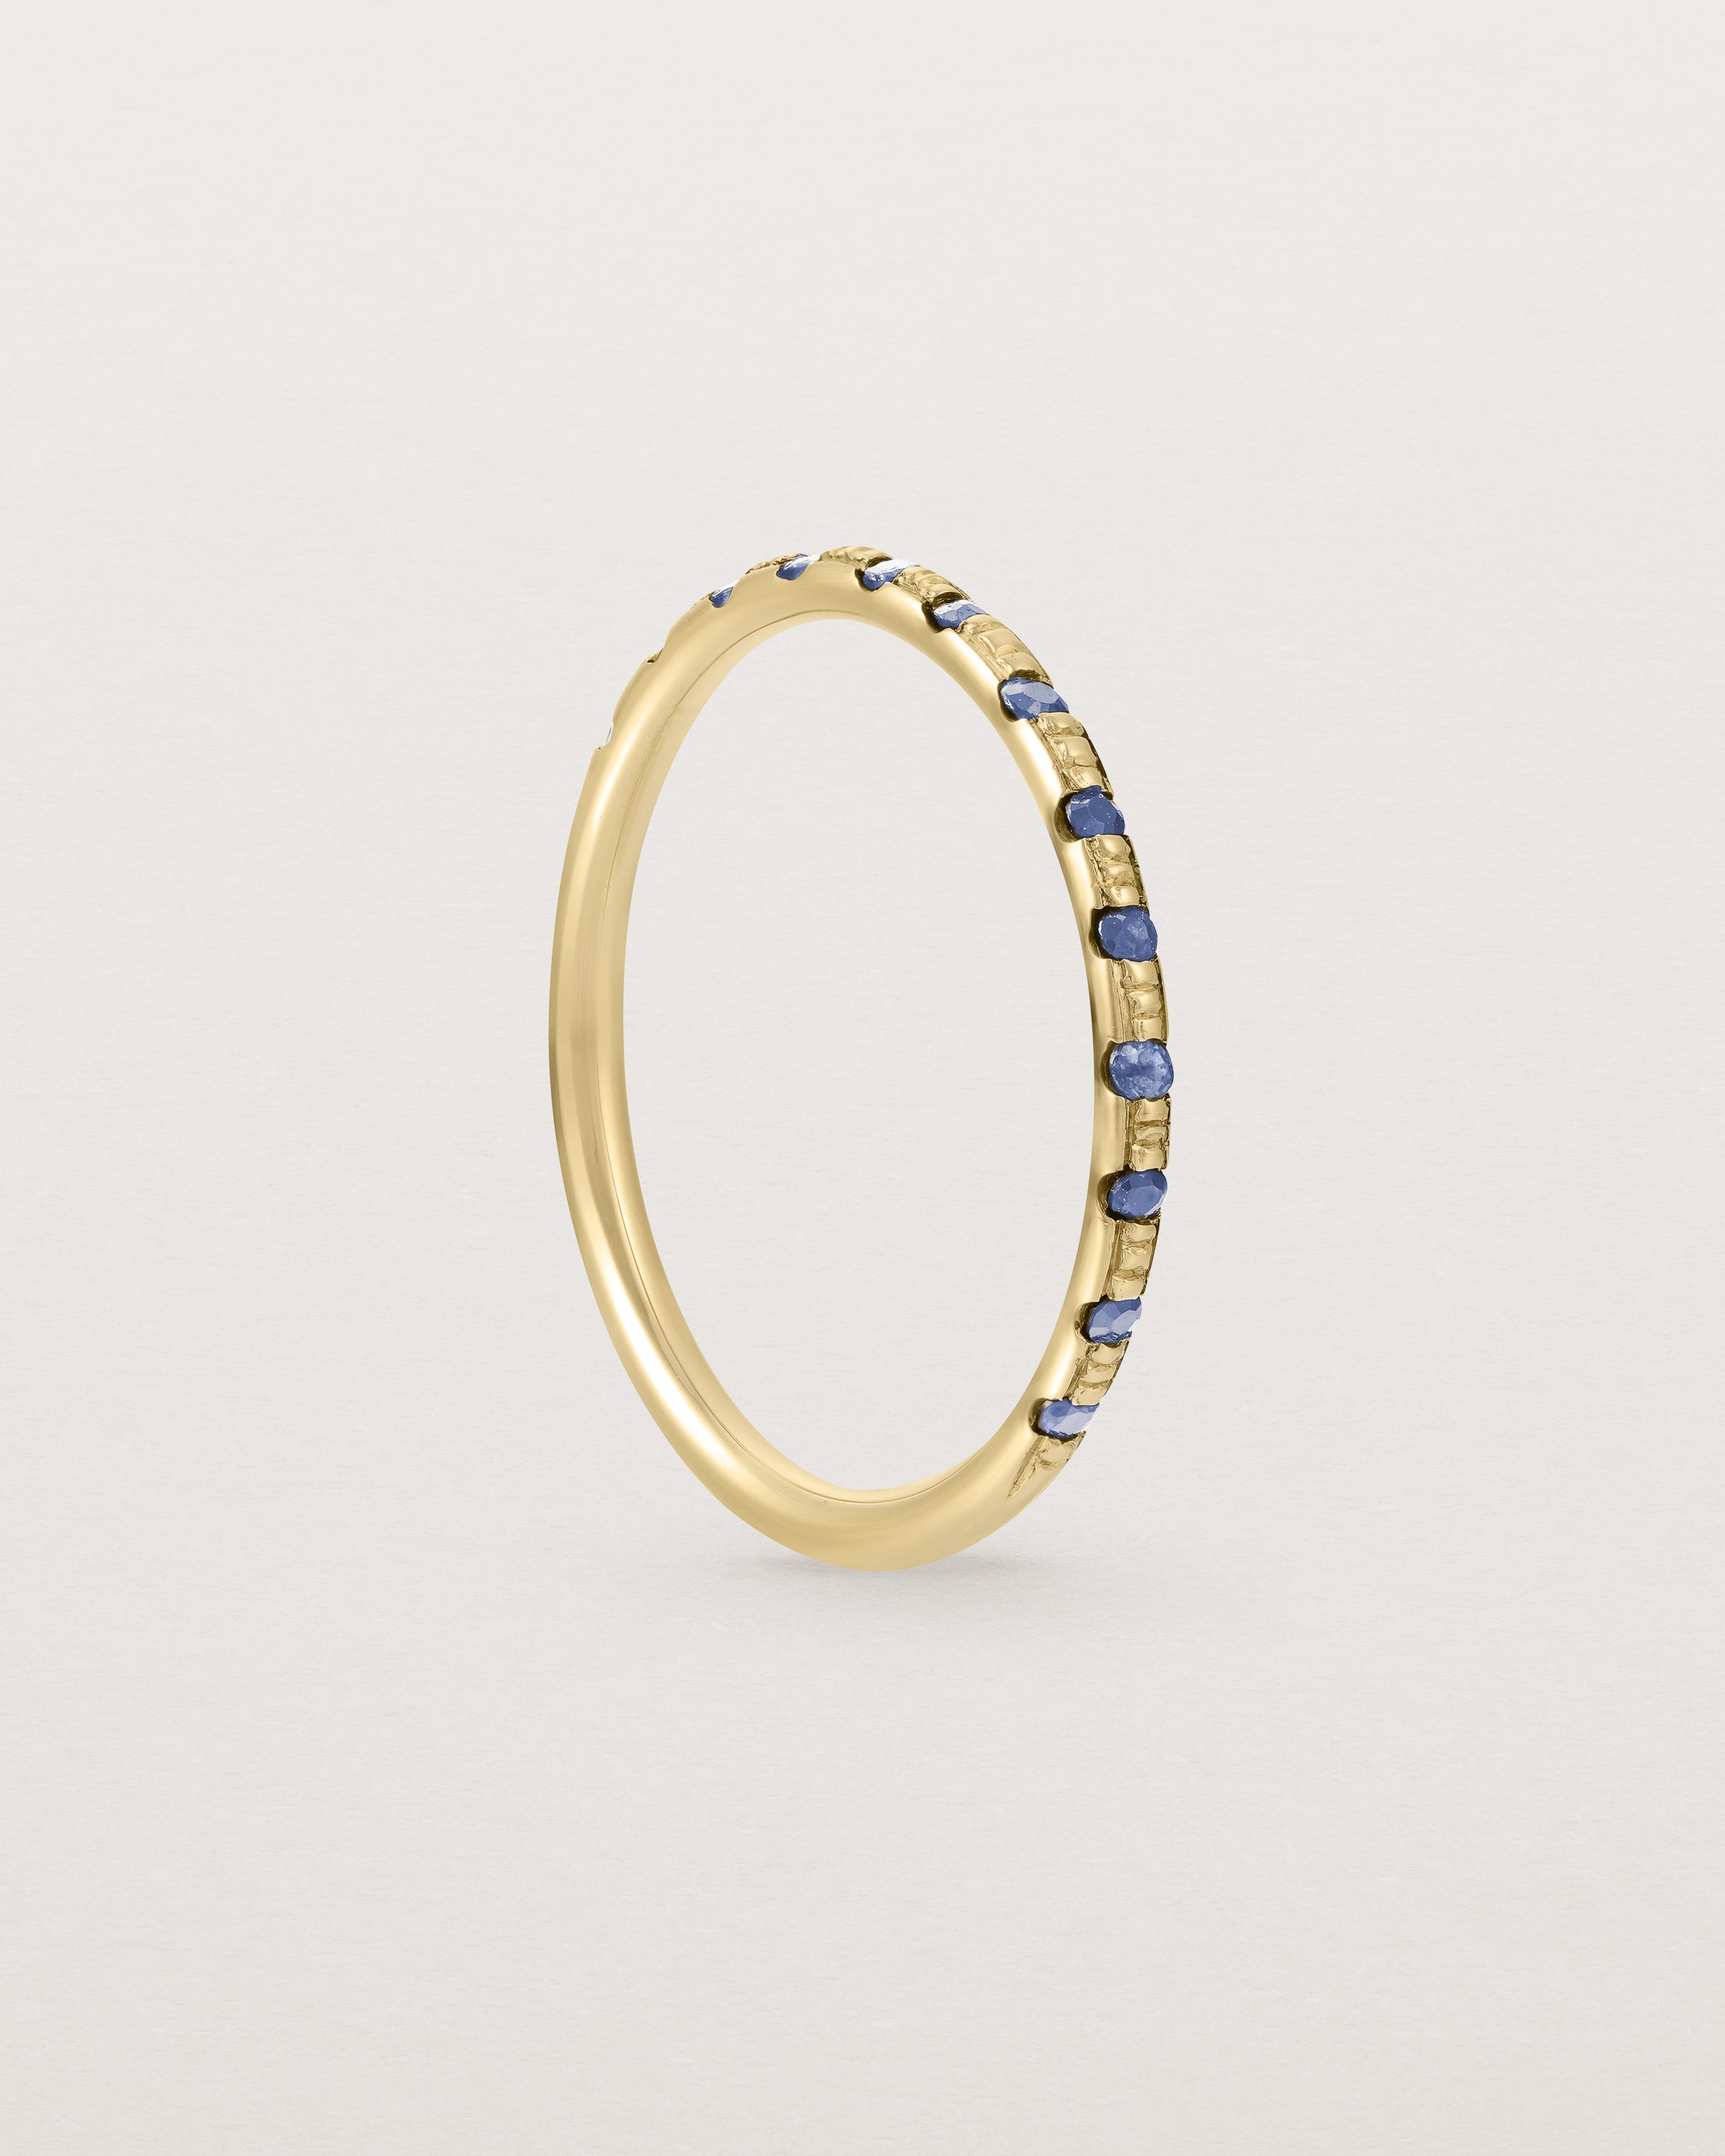 Standing View of Cascade Round Profile Wedding Ring | Sapphire | Yellow Gold 